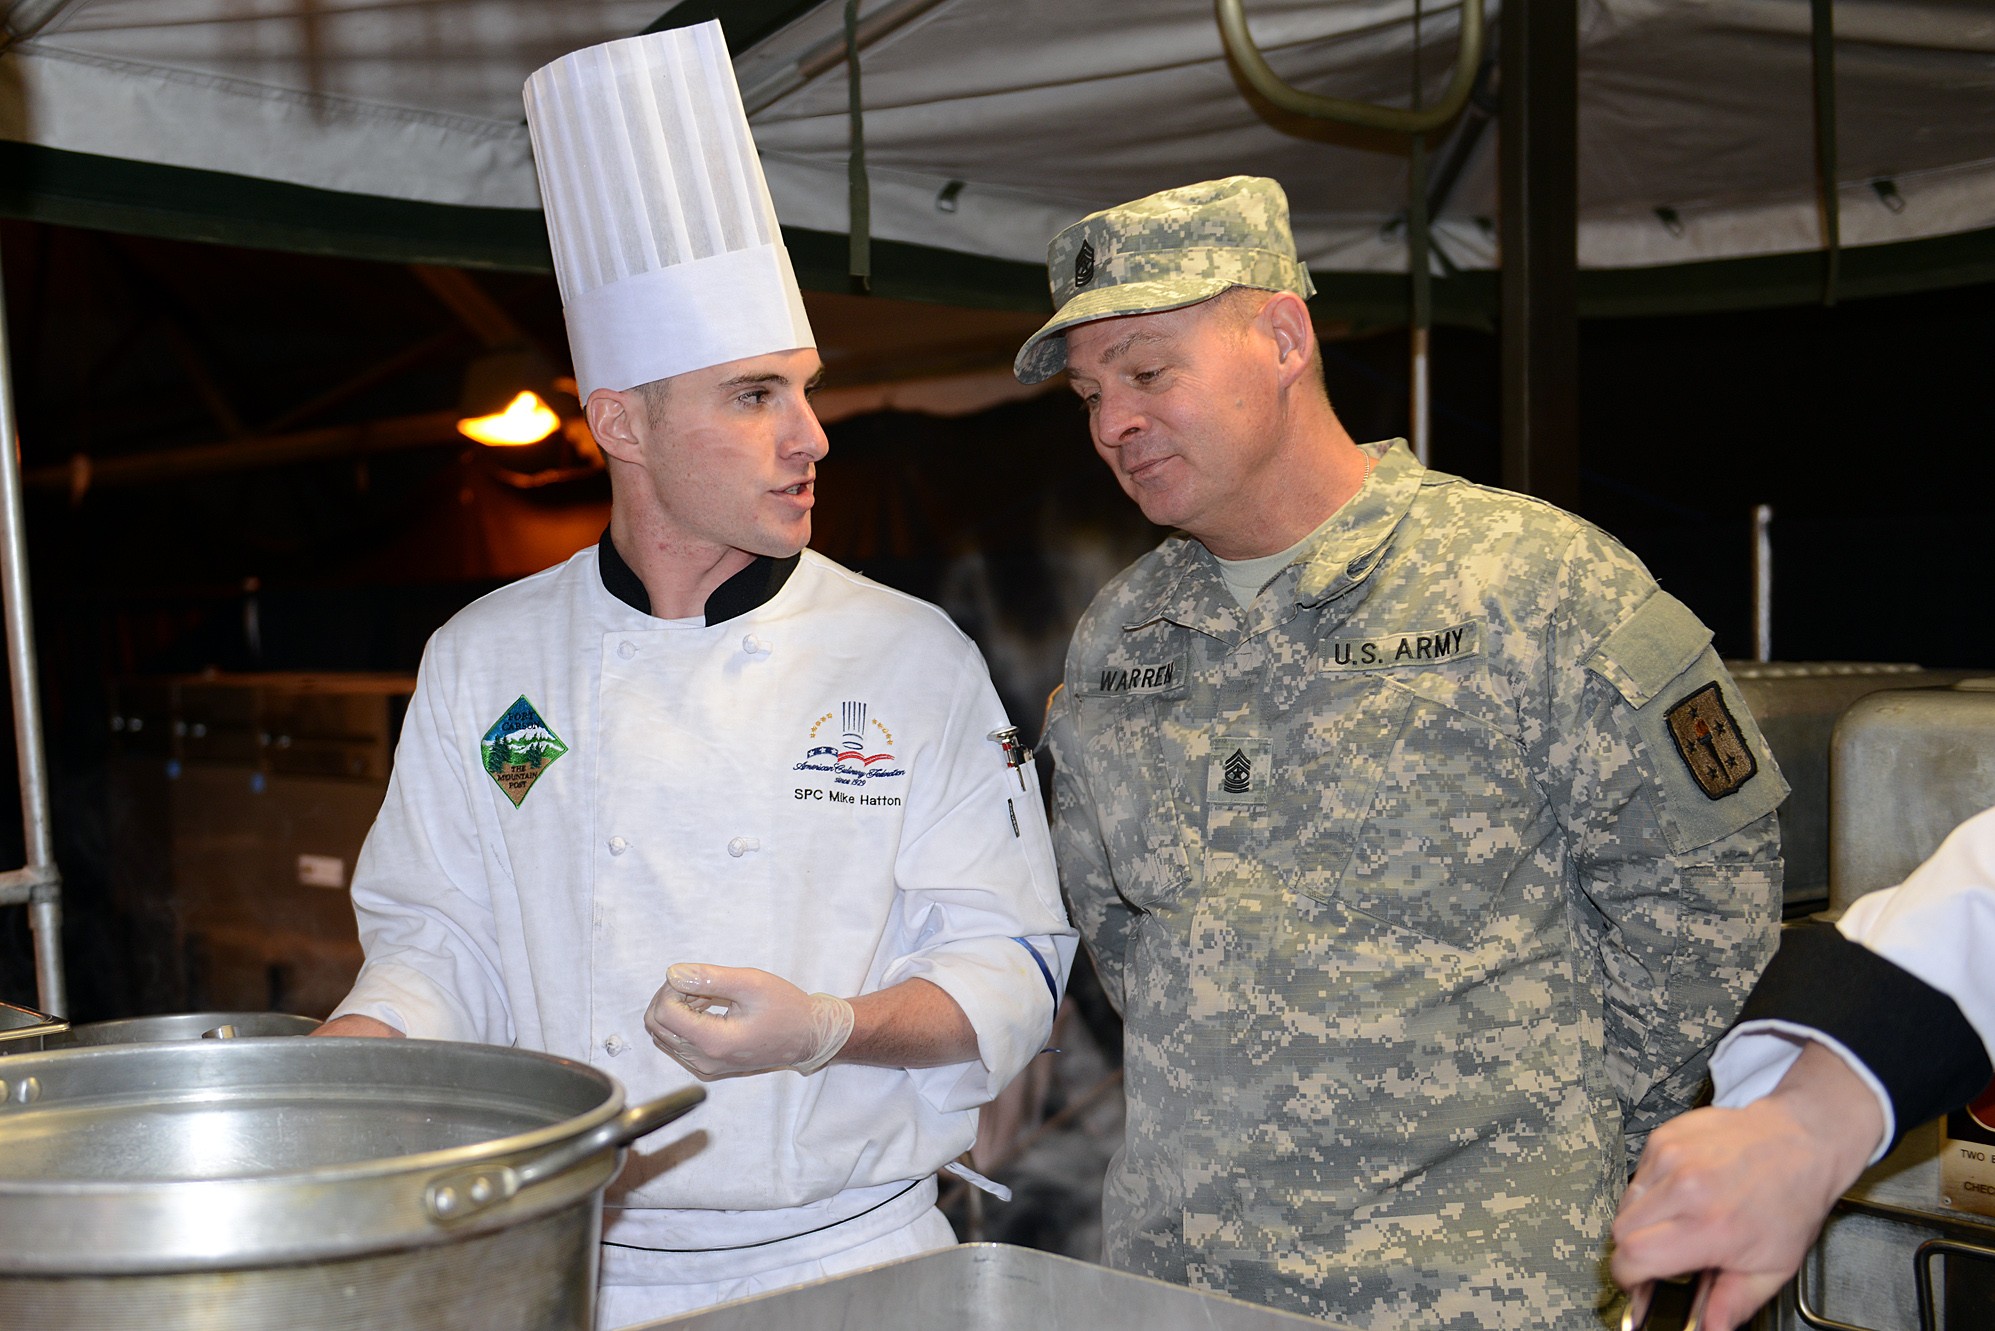 Military culinary arts competition heats up at Fort Lee Article The